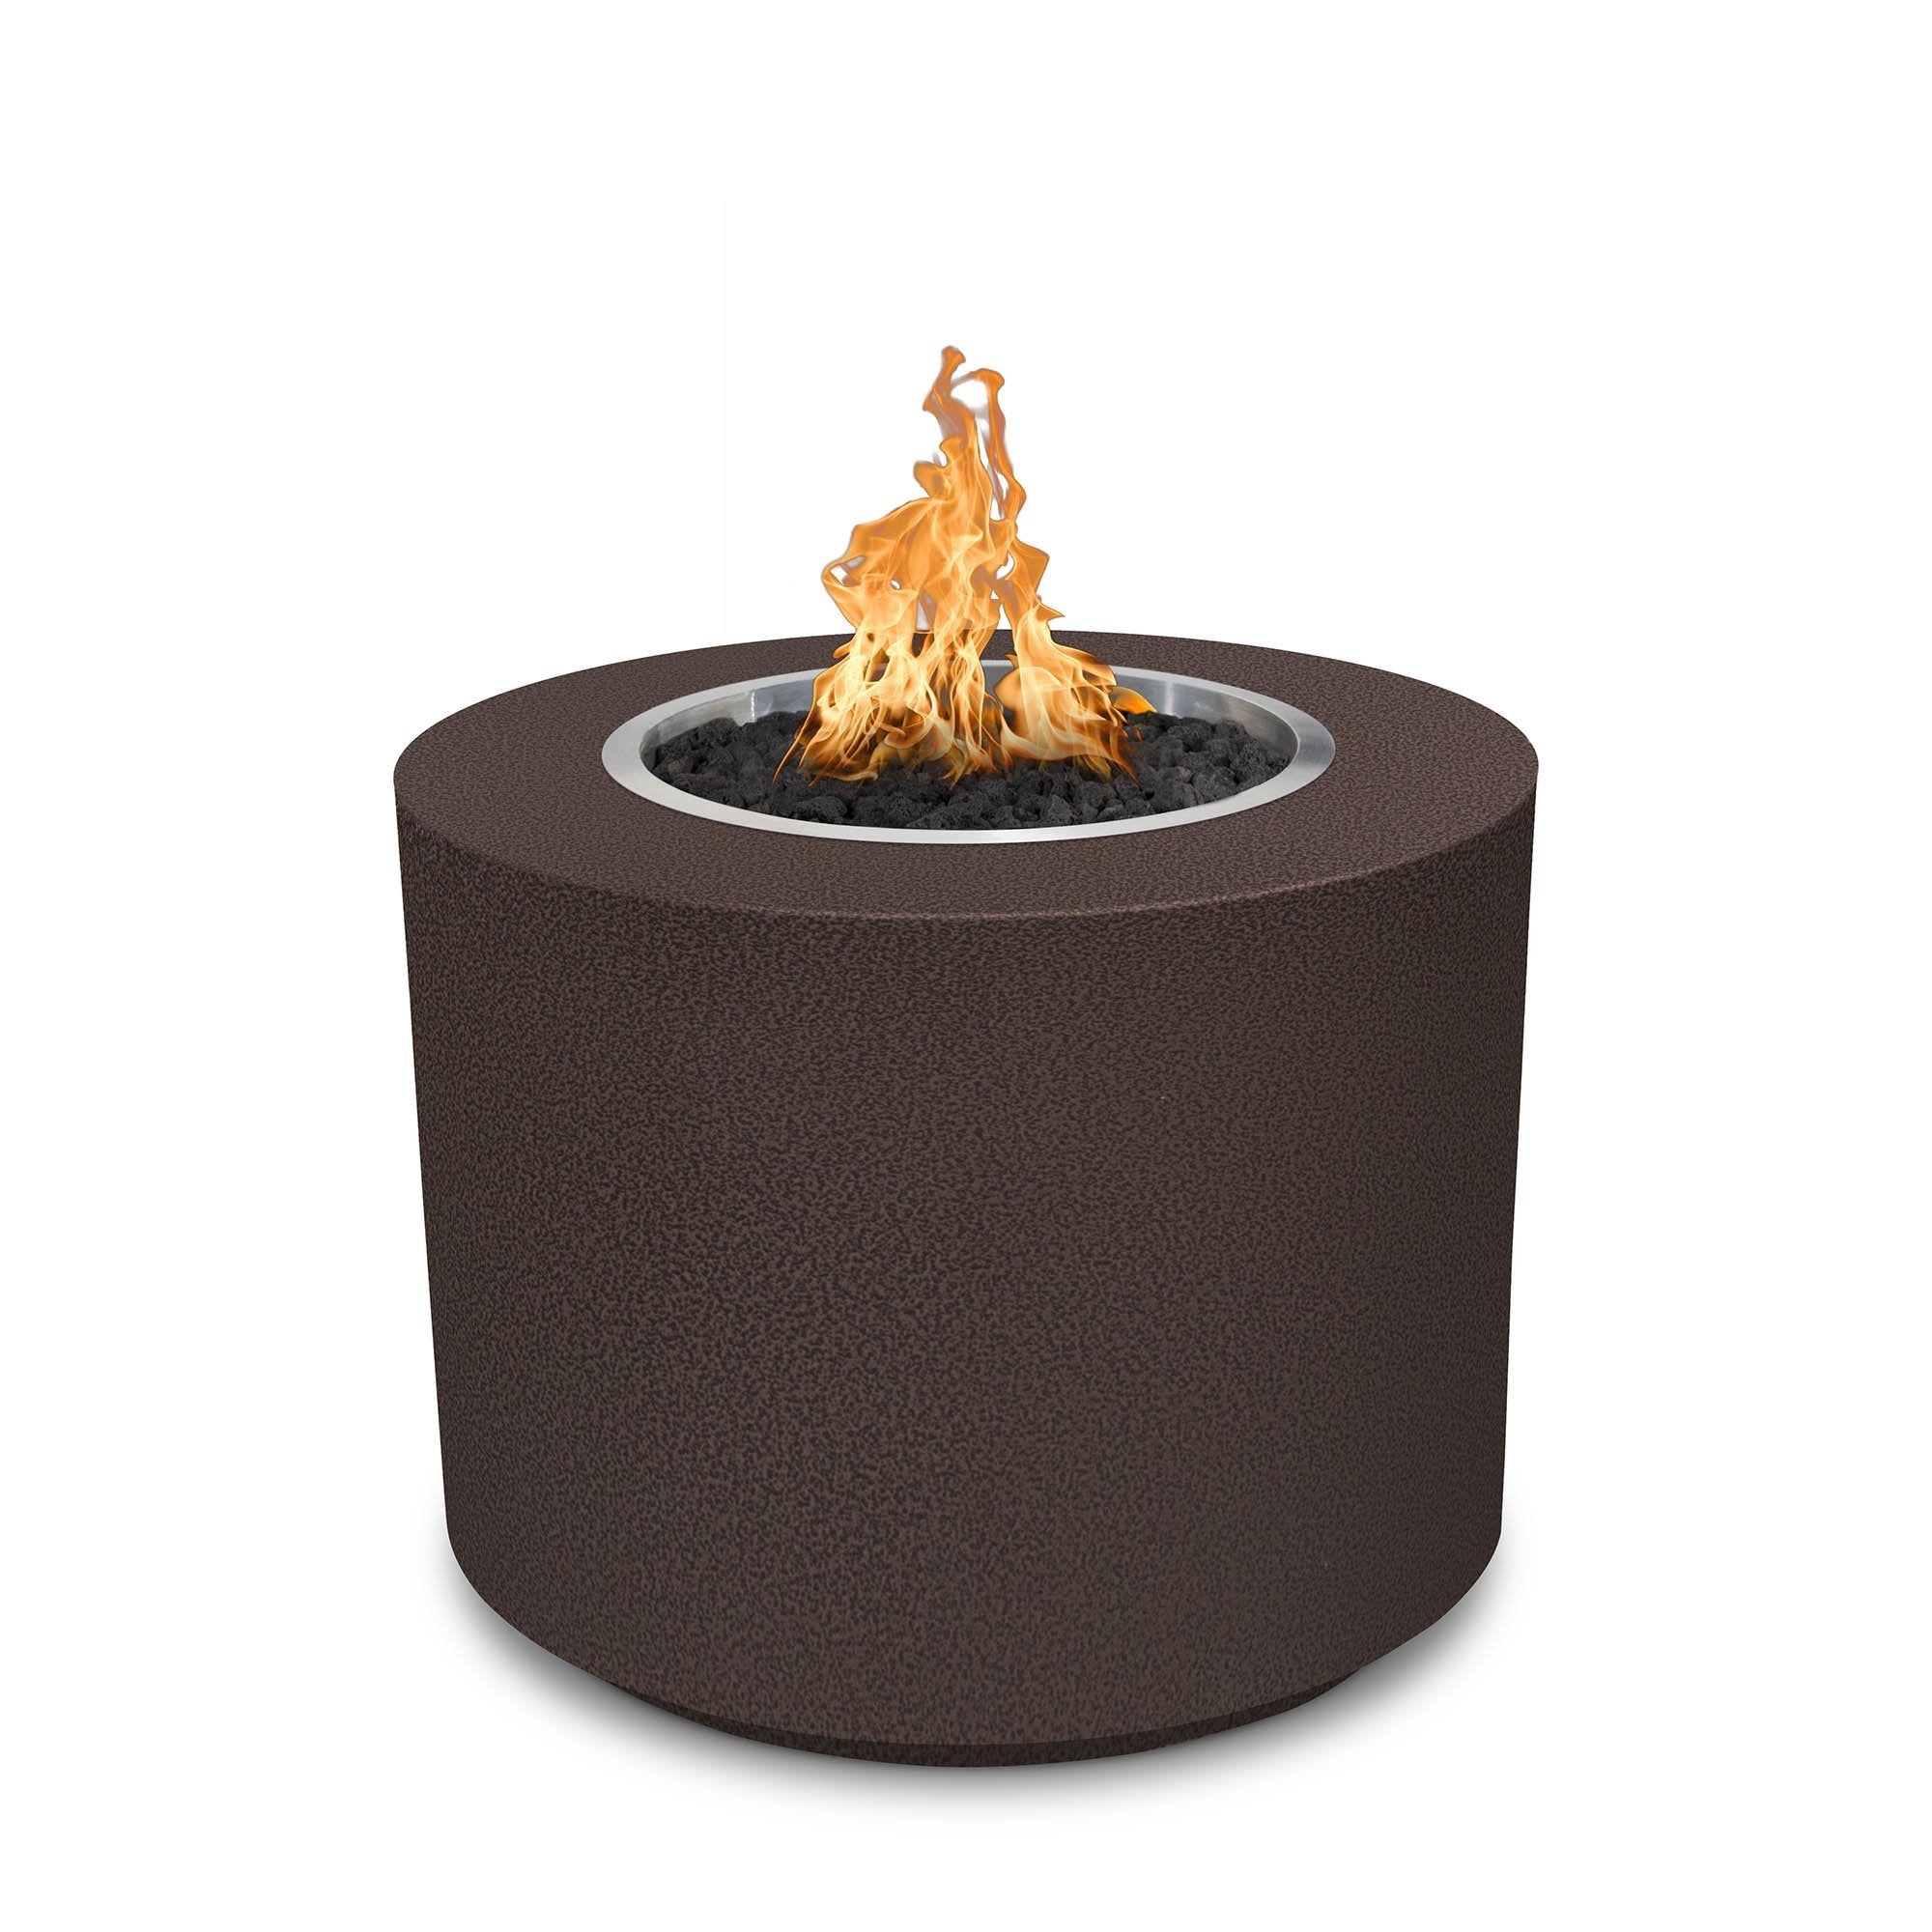 The Outdoor Plus Beverly Fire Pit in Copper Vein with Flame on White Background